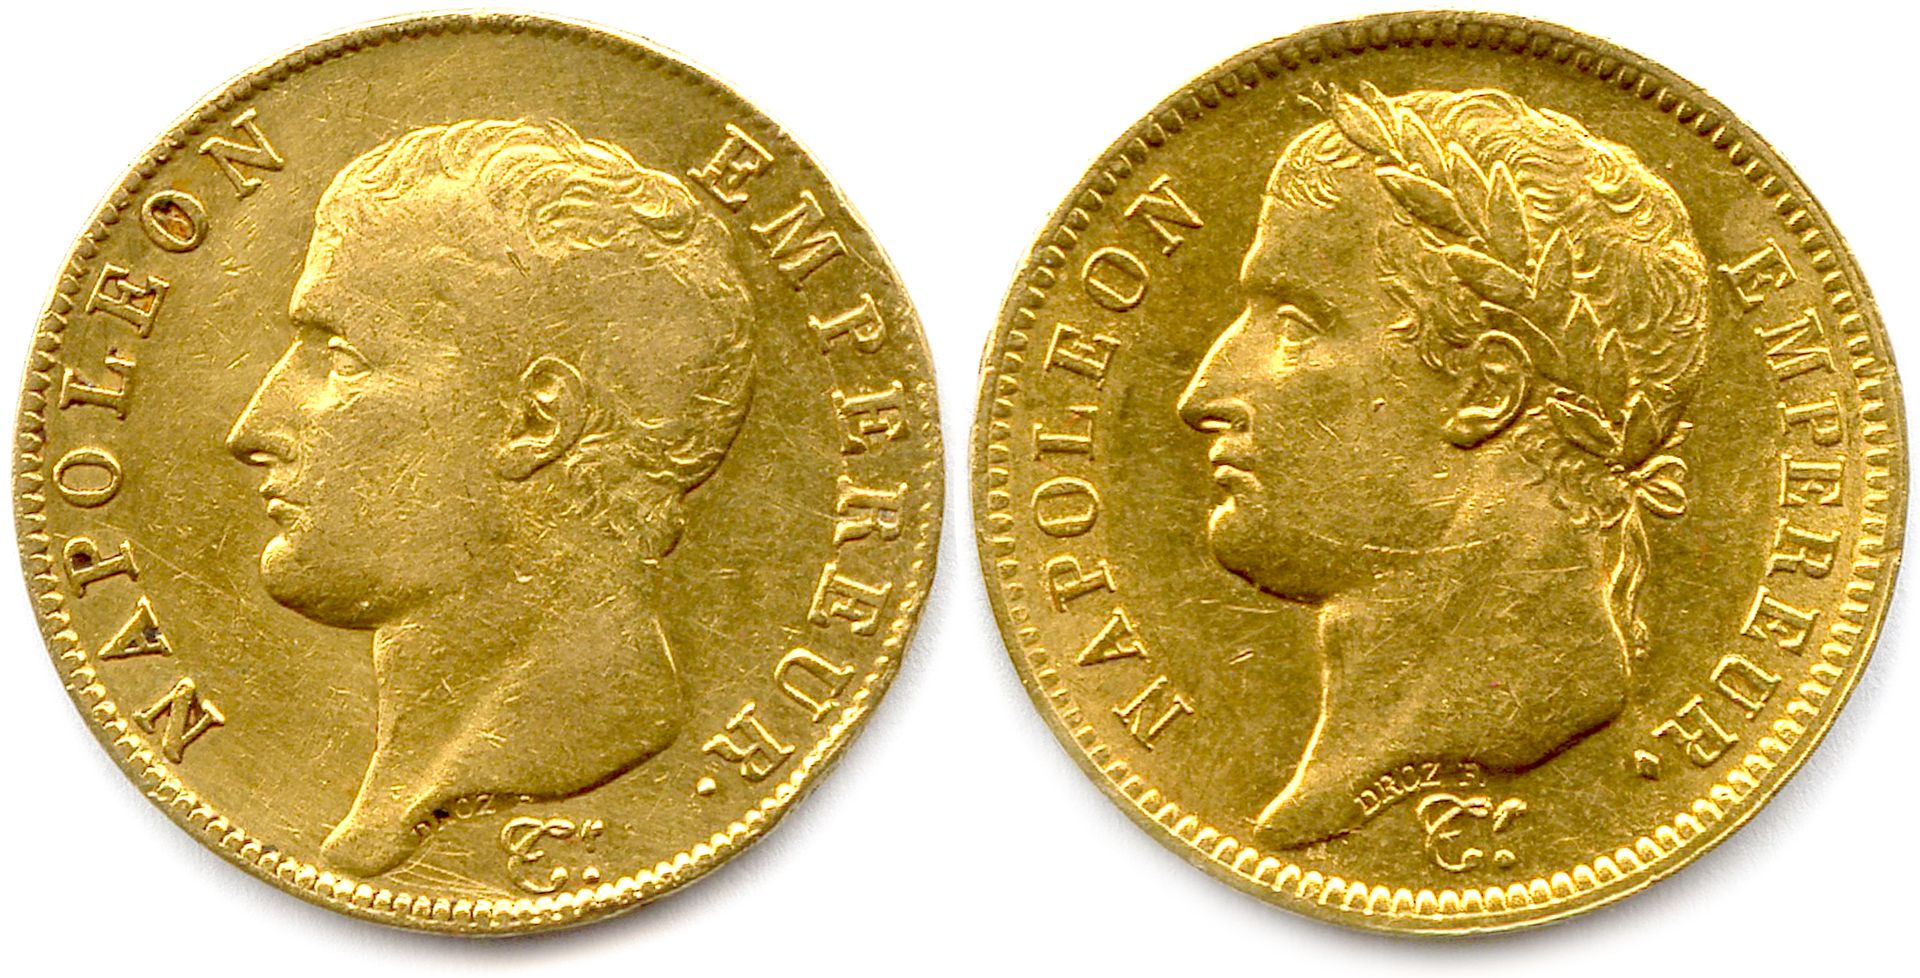 Null NAPOLEON I 18 May 1804 - 6 April 1814 193

Two gold coins: 

40 Francs (Rep&hellip;